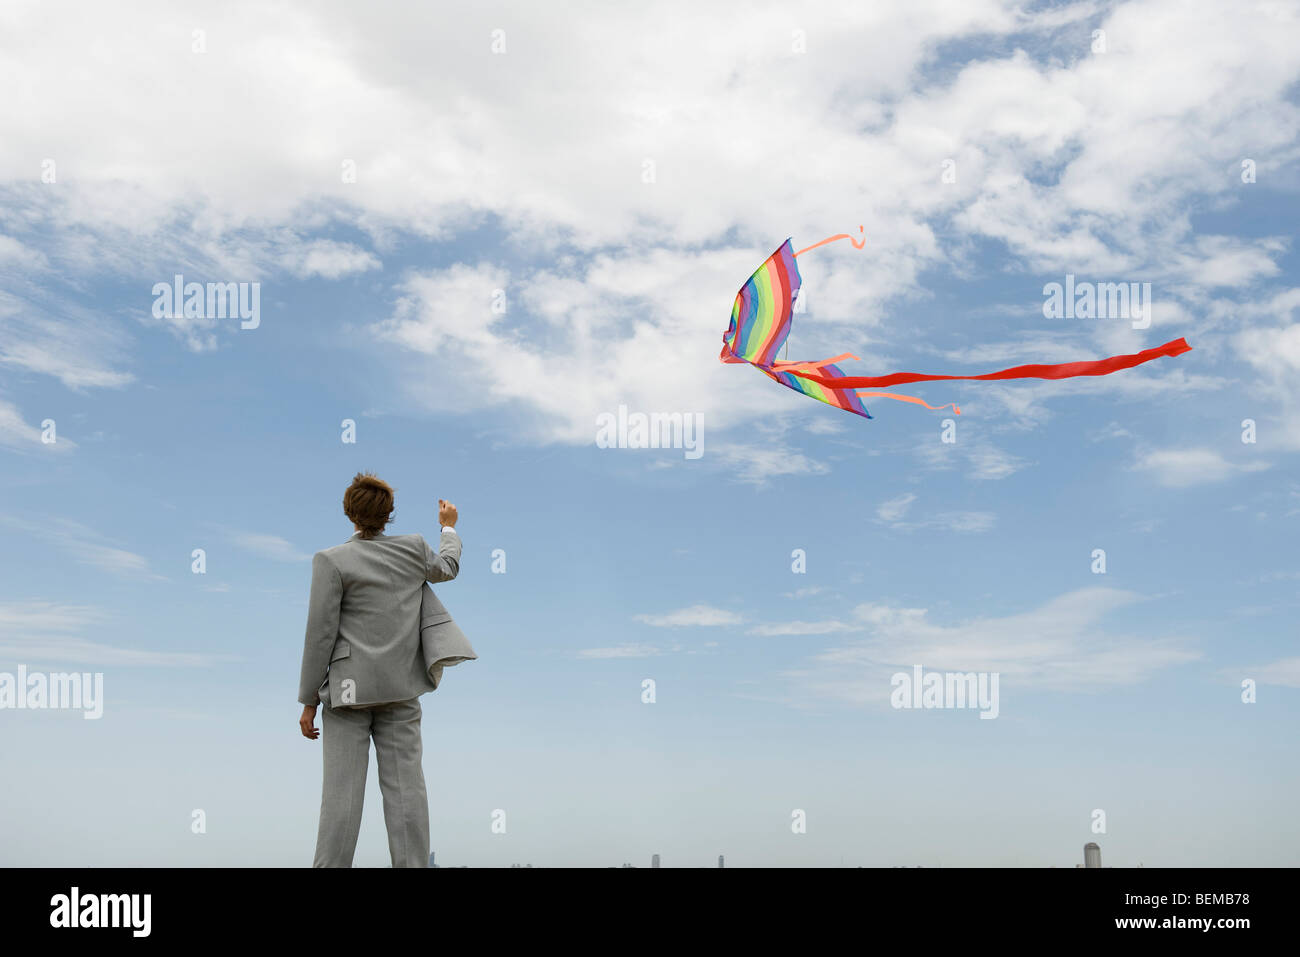 Businessman flying kite in field, rear view Stock Photo